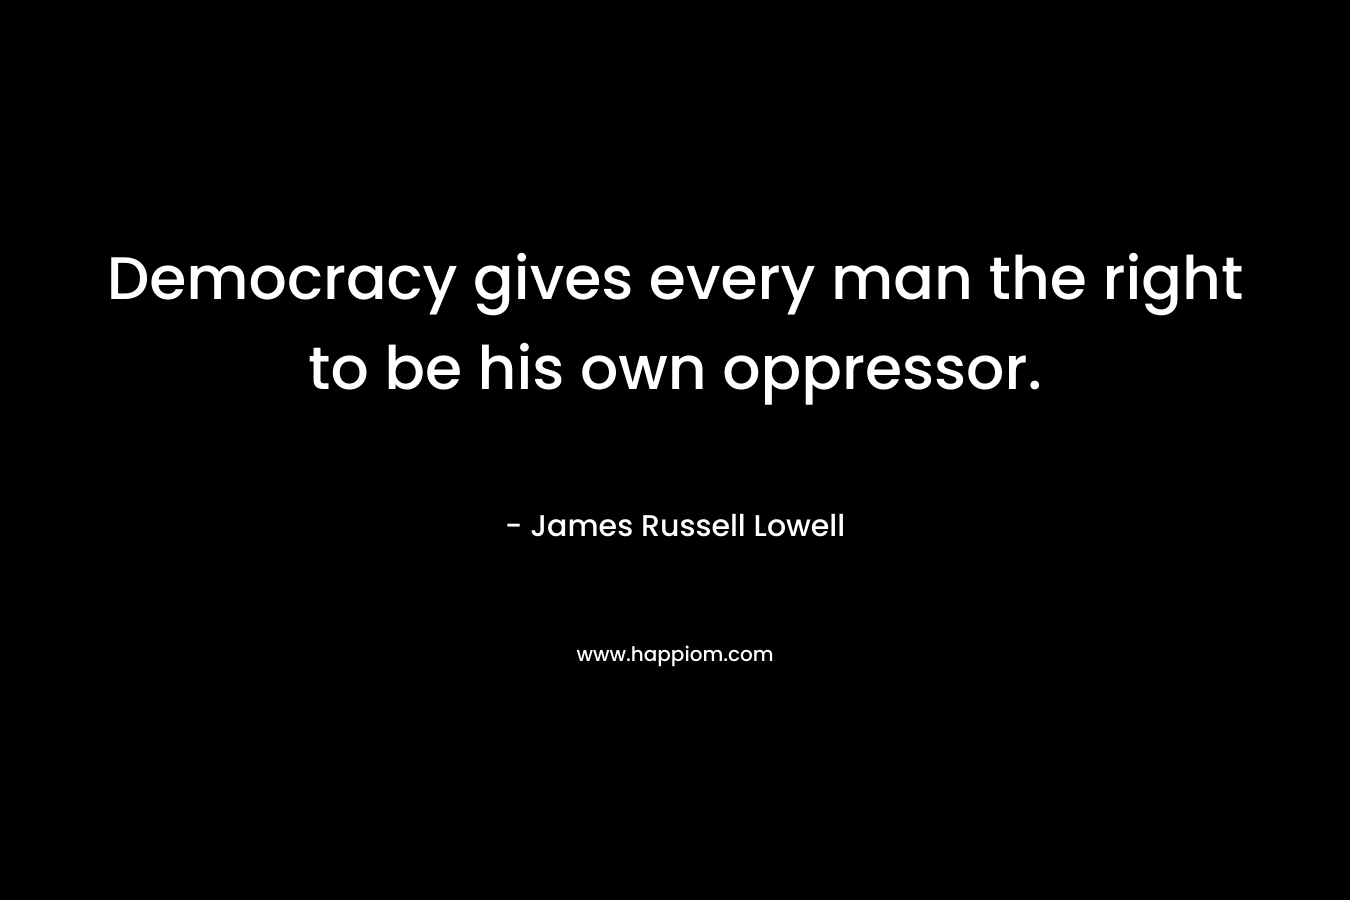 Democracy gives every man the right to be his own oppressor. – James Russell Lowell